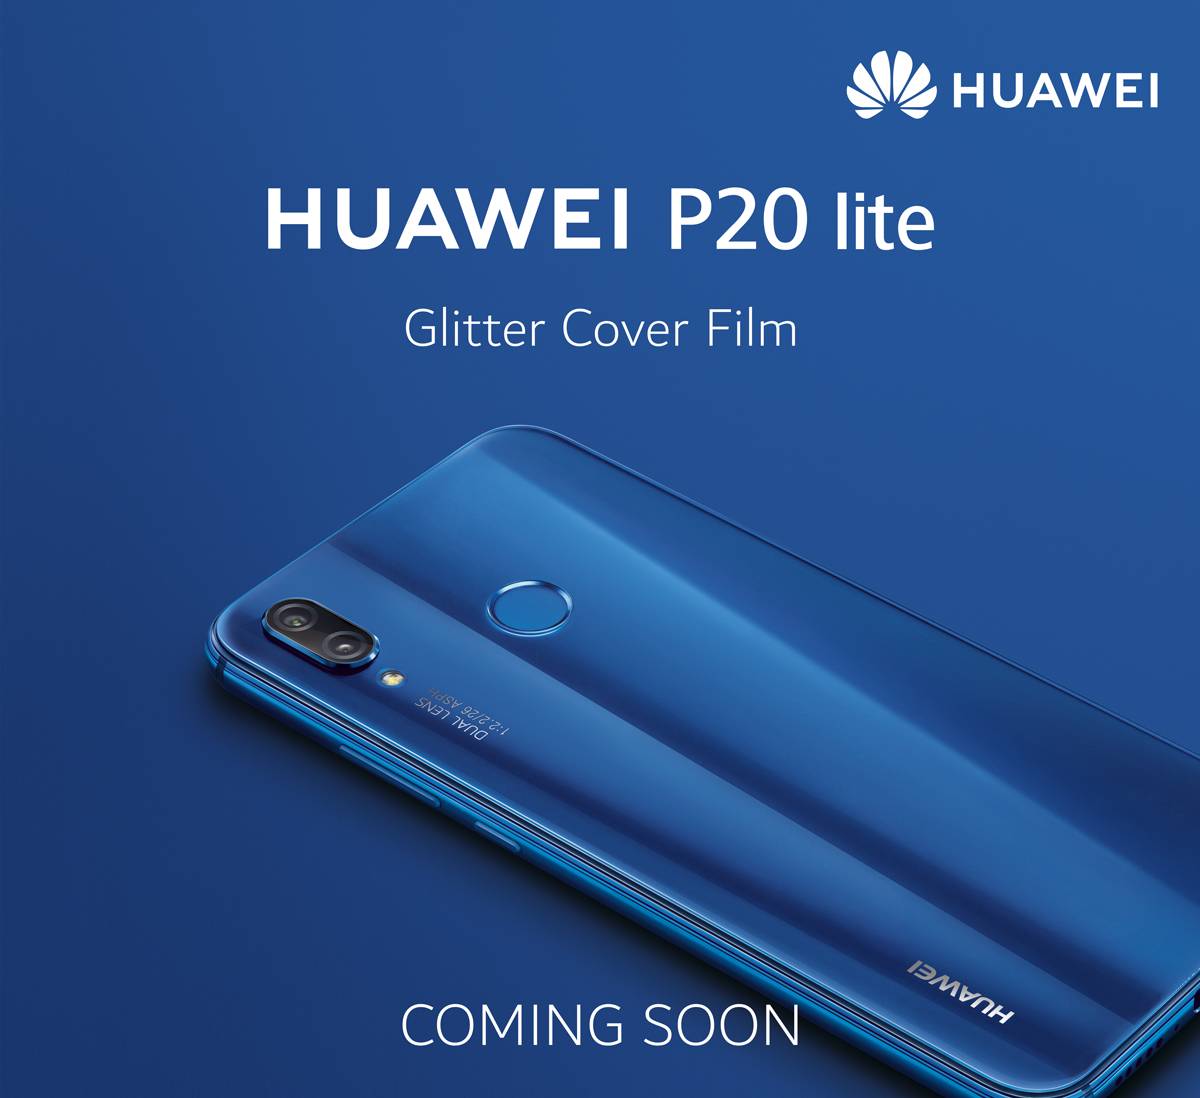 1. Finally, A New Selfie Superstar HUAWEI P20 lite is Coming to Pakistan